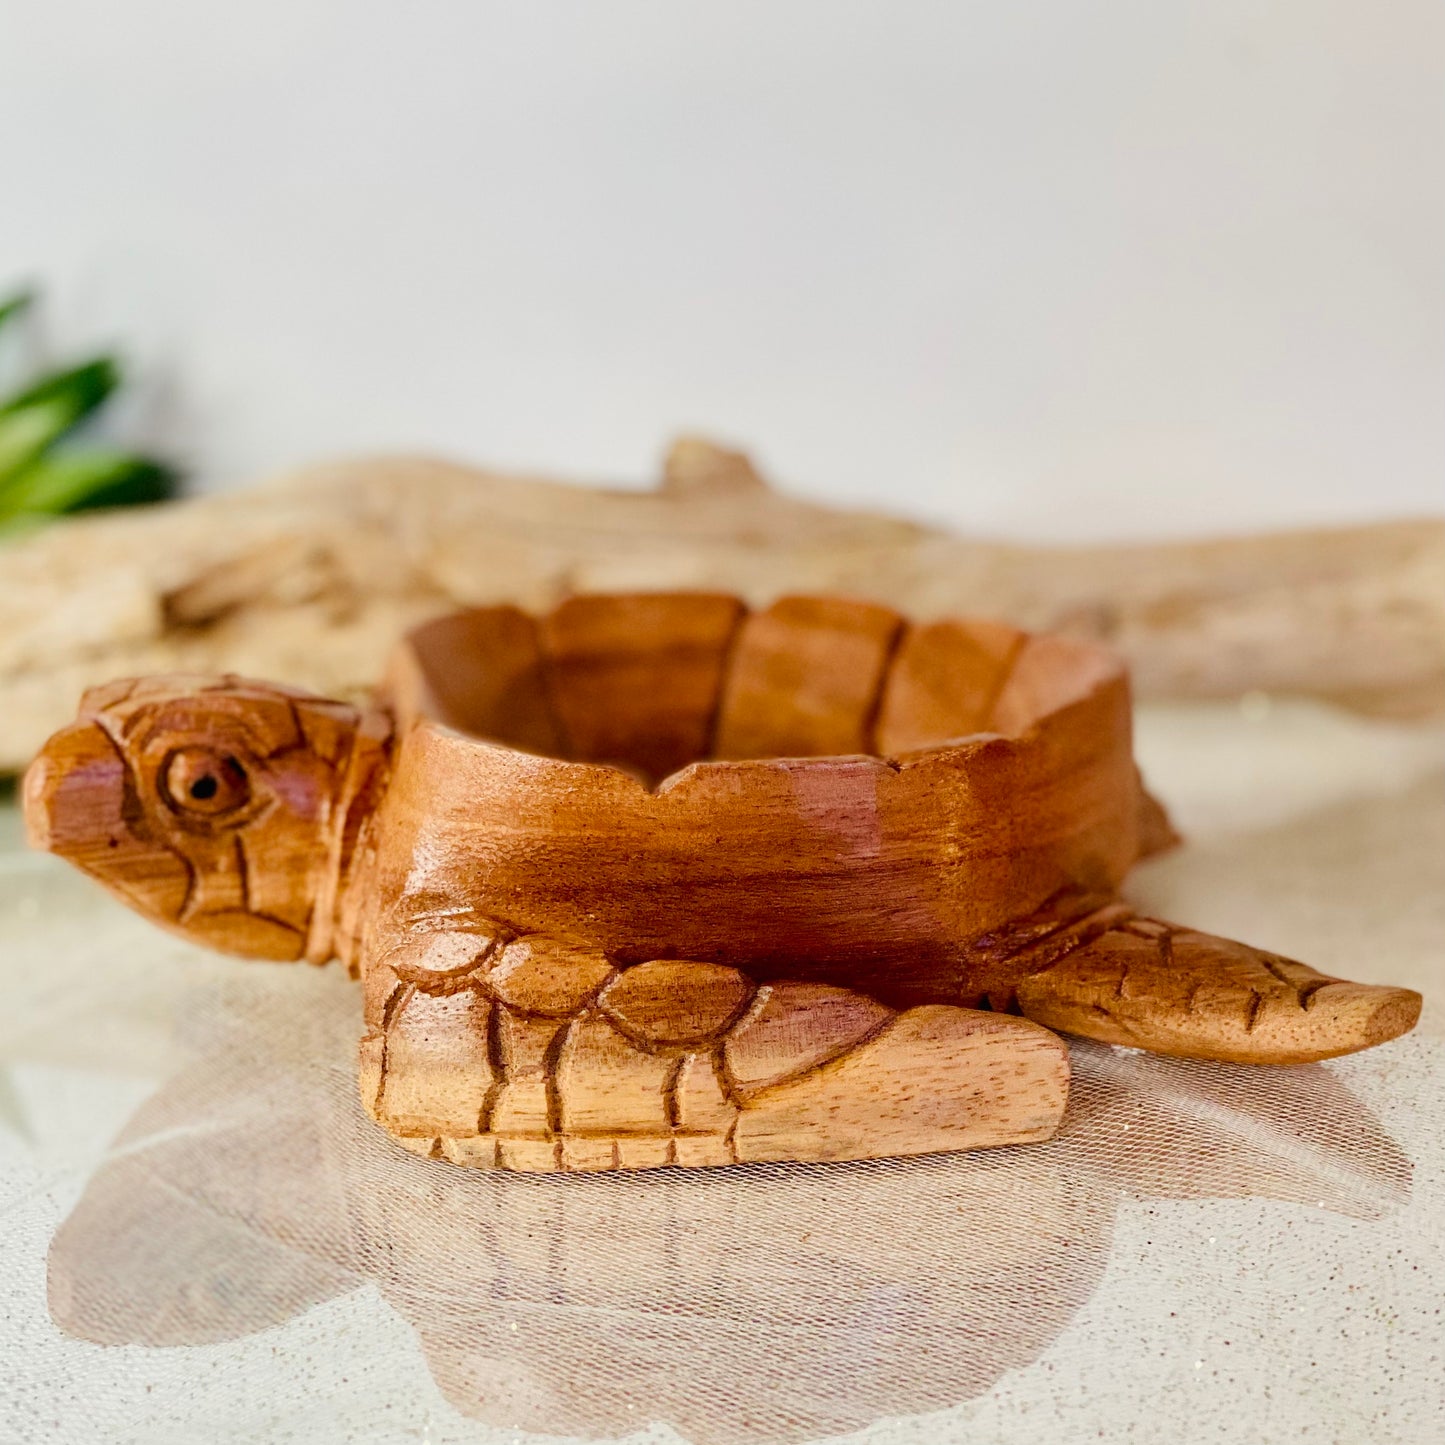 Exquisite Hand-Carved Turtle Bowls from Bali: Artistic Creations with Island Soul